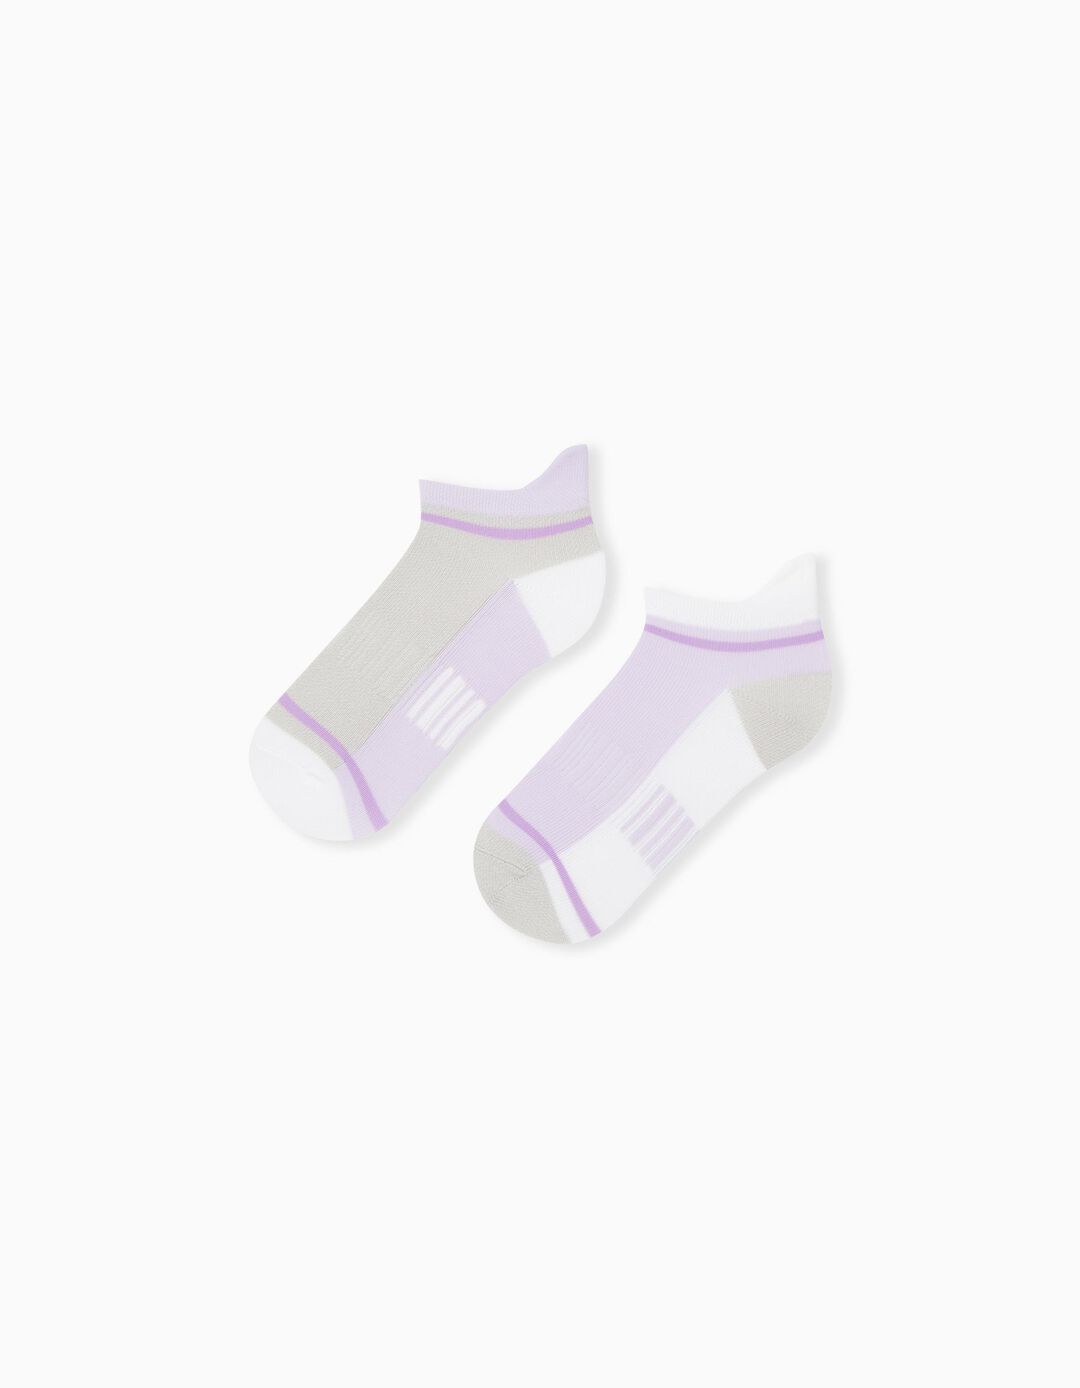 2 Pairs of Sports Socks Pack, Girls, Multicolour